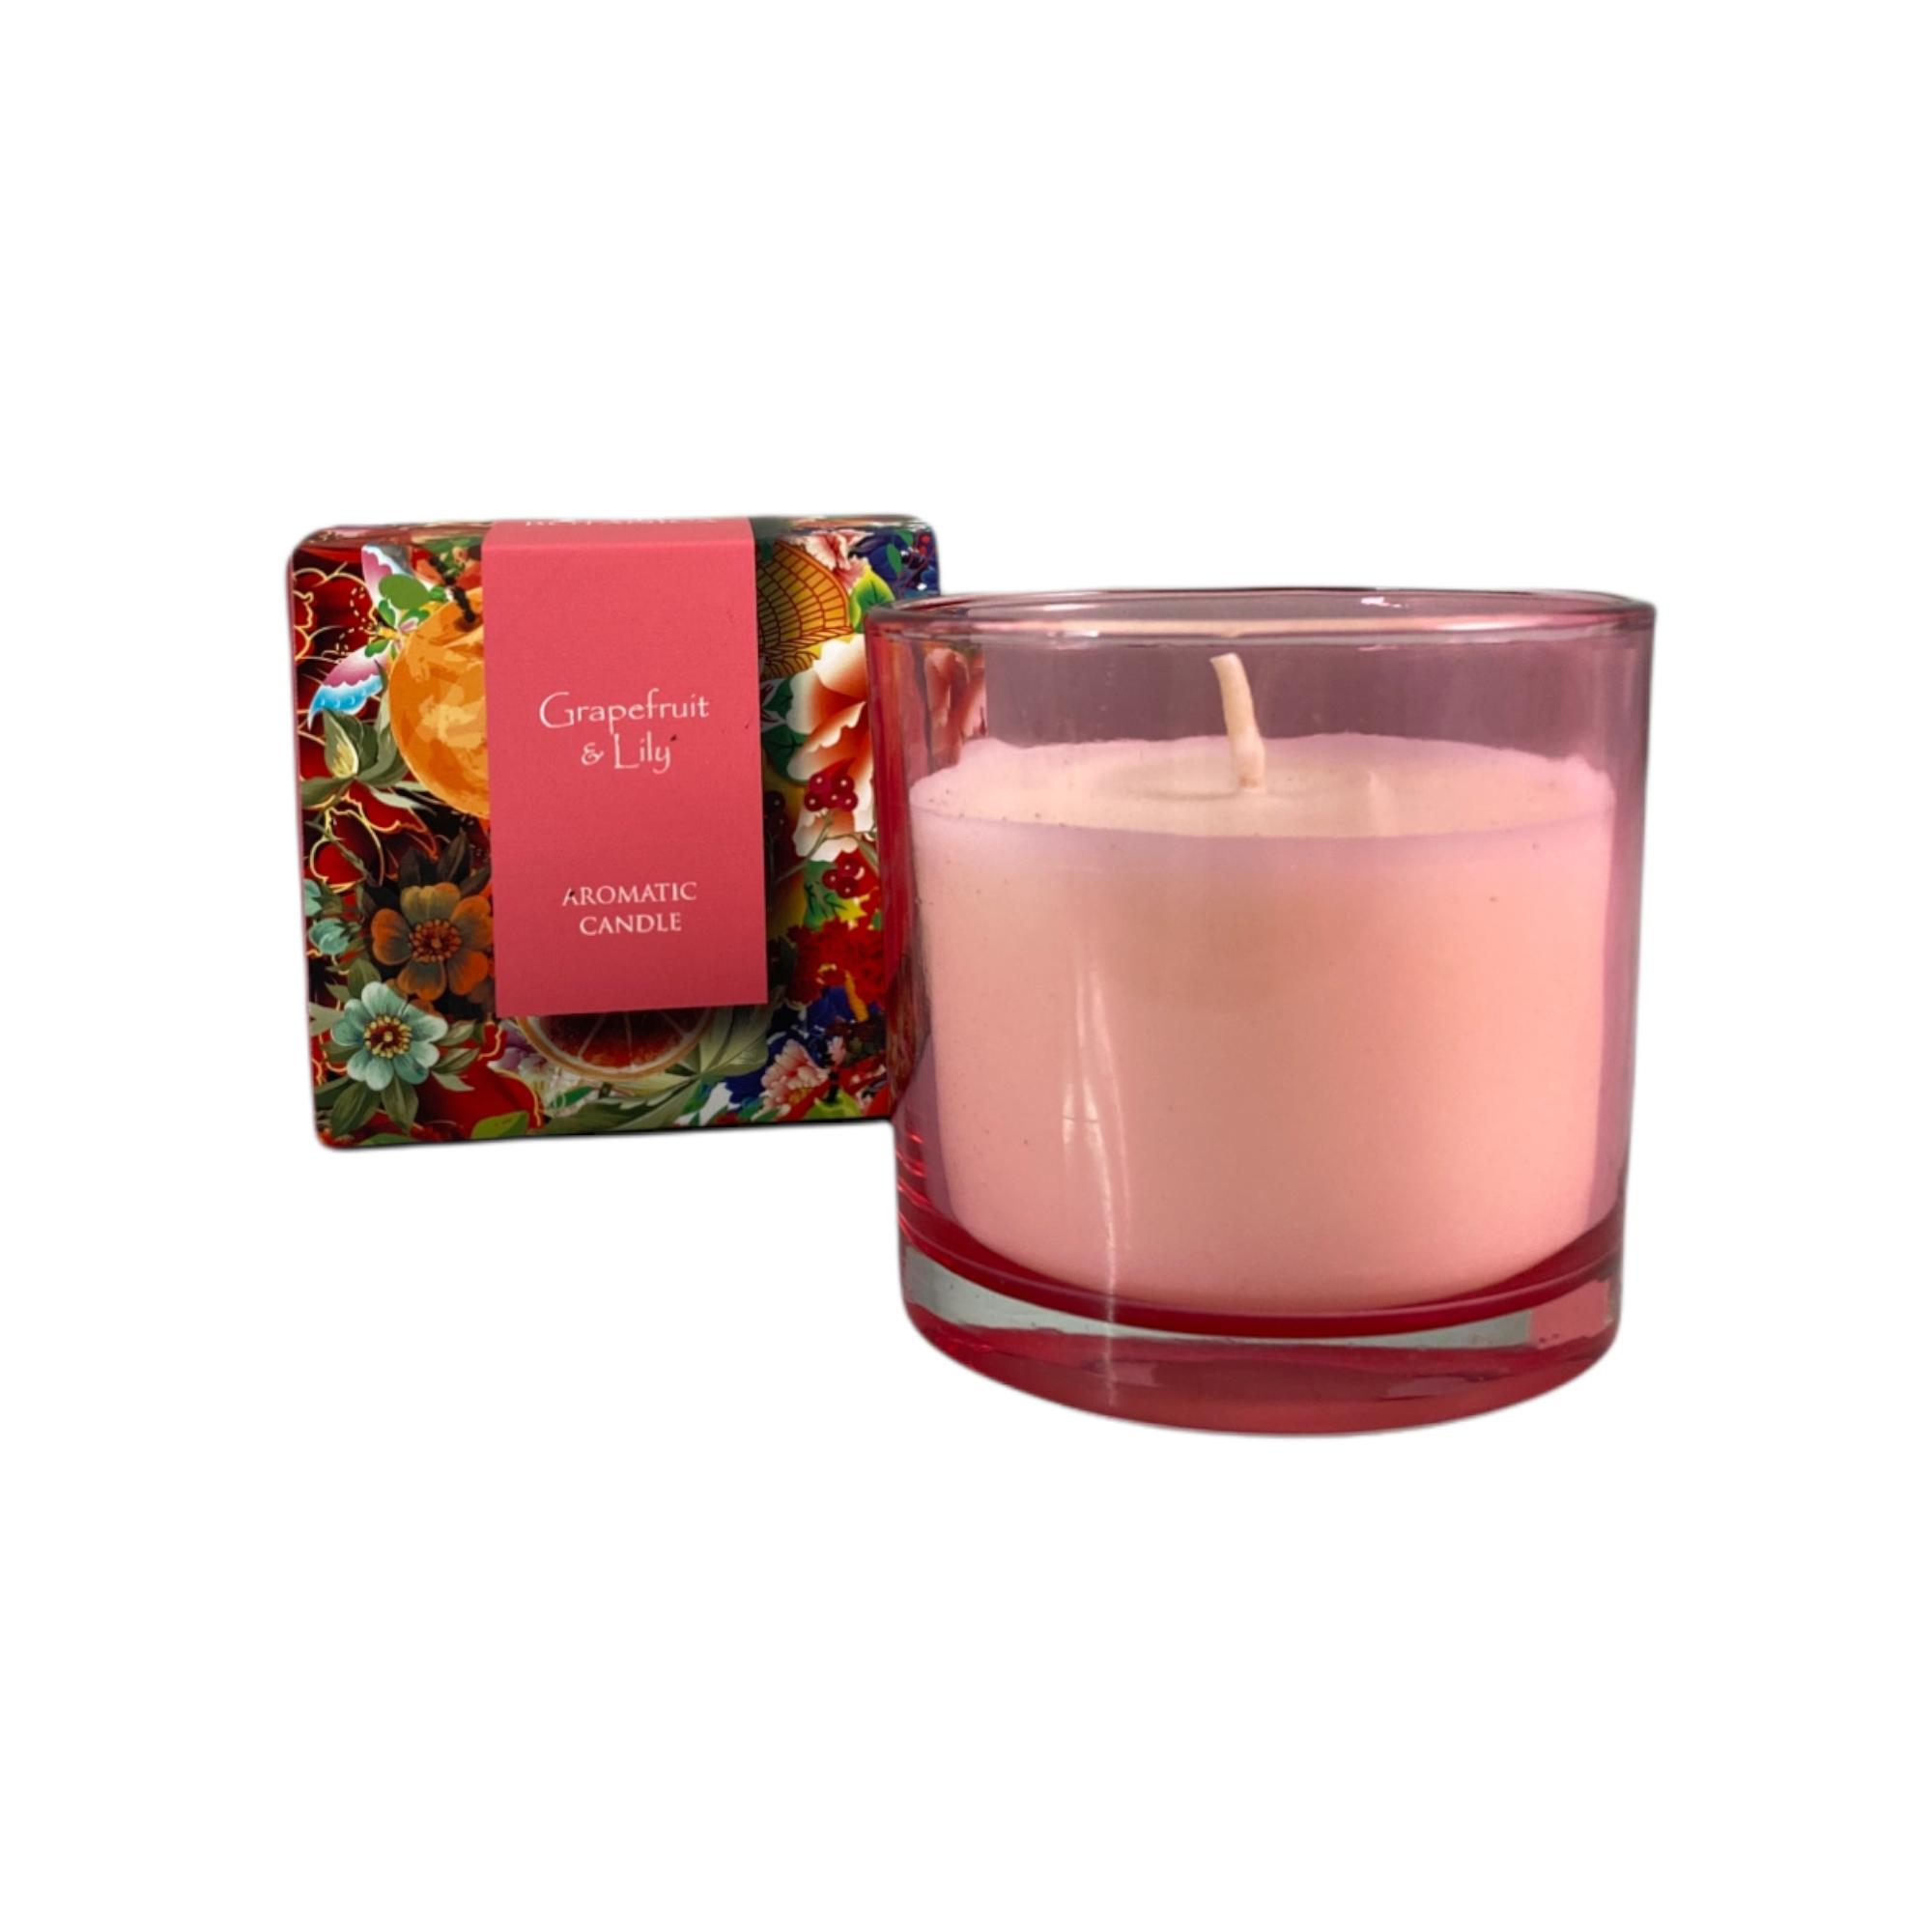 SCENTED CANDLE 8X8X7.4CM - 415-651930